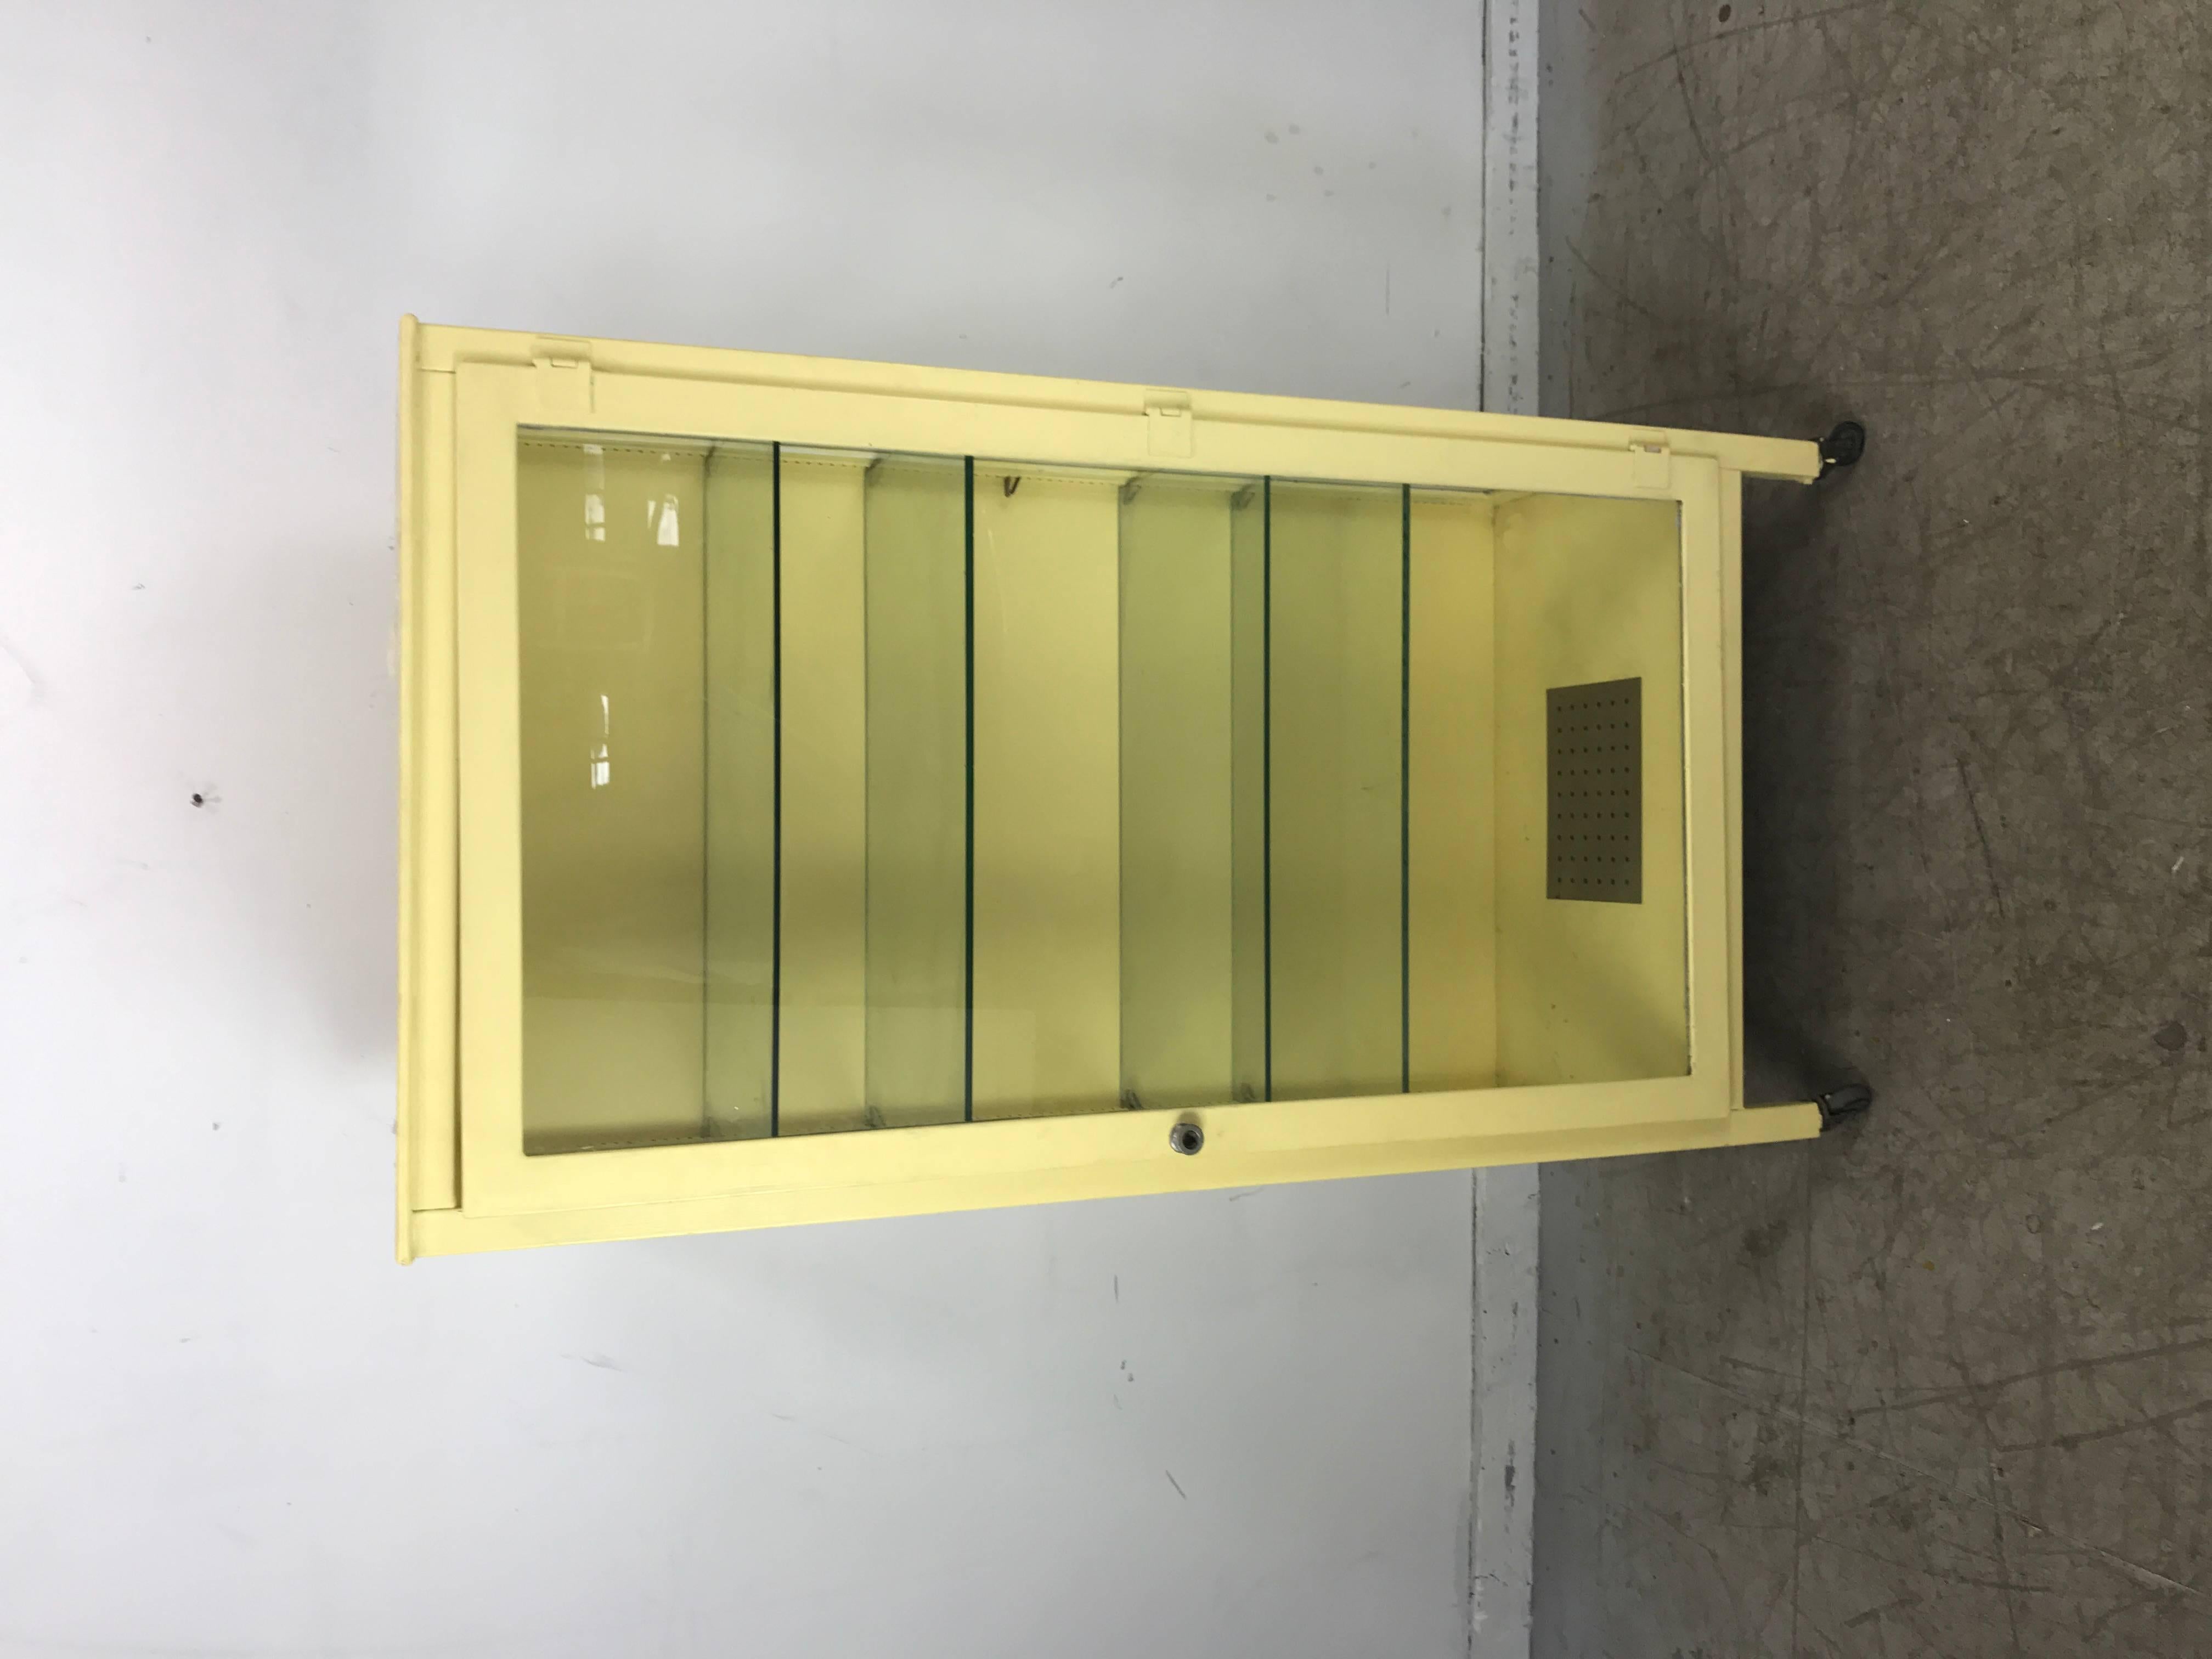 Classic Industrial metal and glass cabinet. Painted steel with large door and four interior glass adjustable shelves, hand delivery avail to New York City or anywhere en route from Buffalo New York.